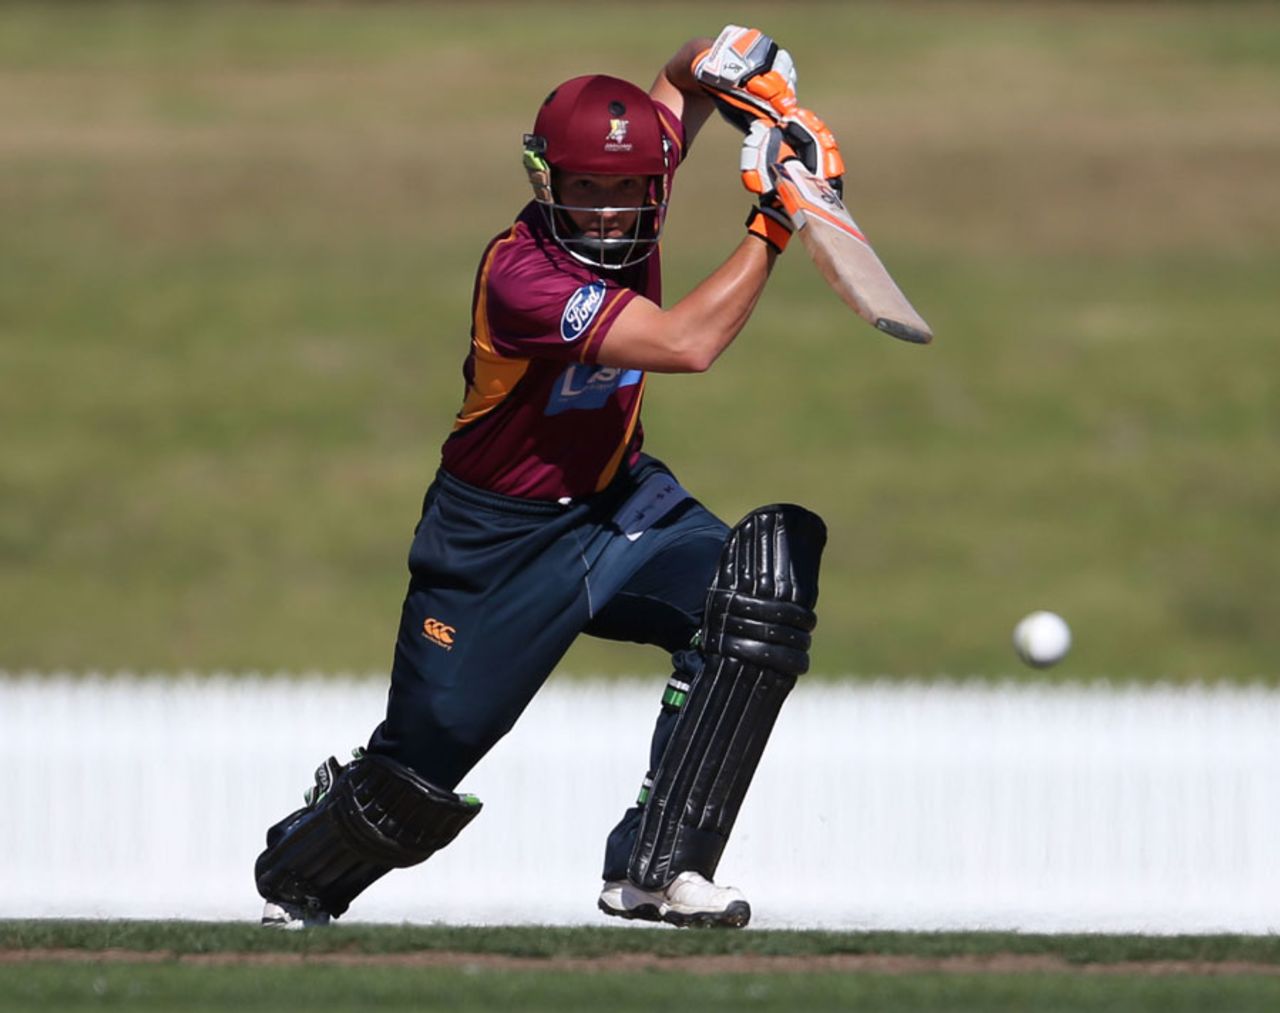 BJ Watling struck a composed half-century, Northern Districts v Wellington, The Ford Trophy final, Mount Maunganui, April 5, 2014